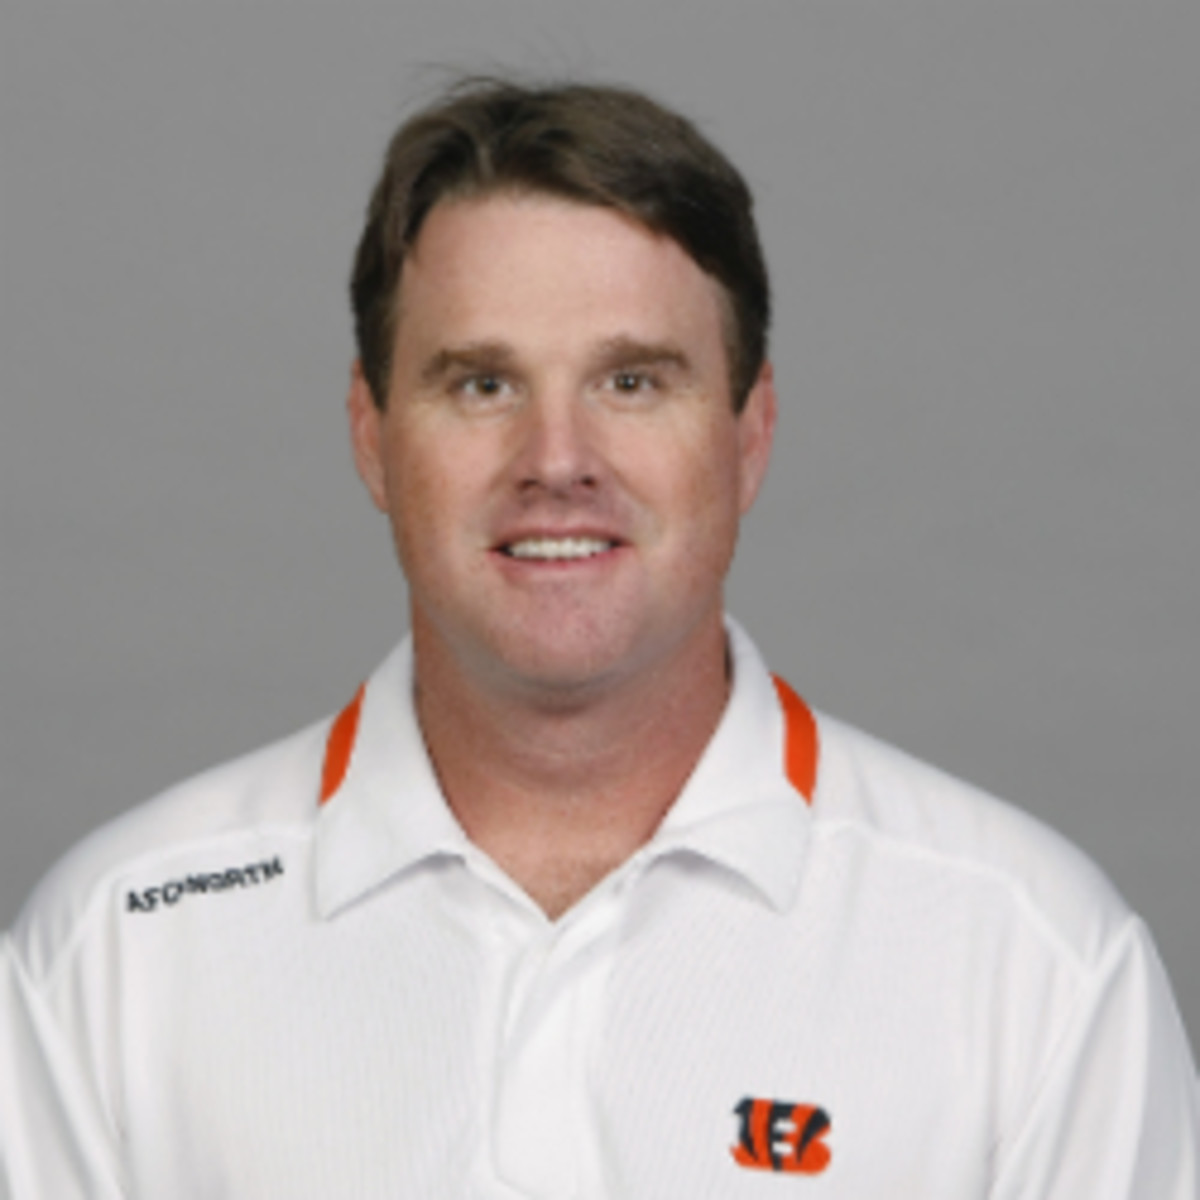 Both the Cardinals and Eagles will interview Bengals offensive coordinator Jay Gruden for their head coach openings. (Getty Images)